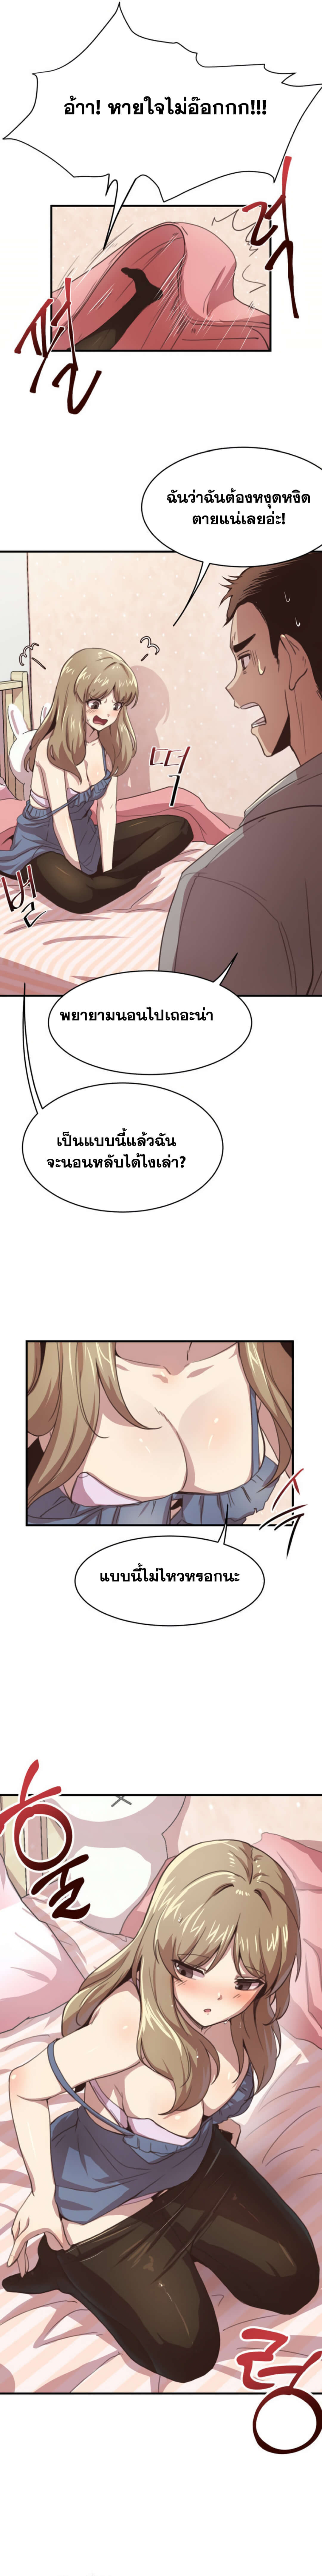 With My Brother’s Friends ตอนที่ 1 ภาพ 15